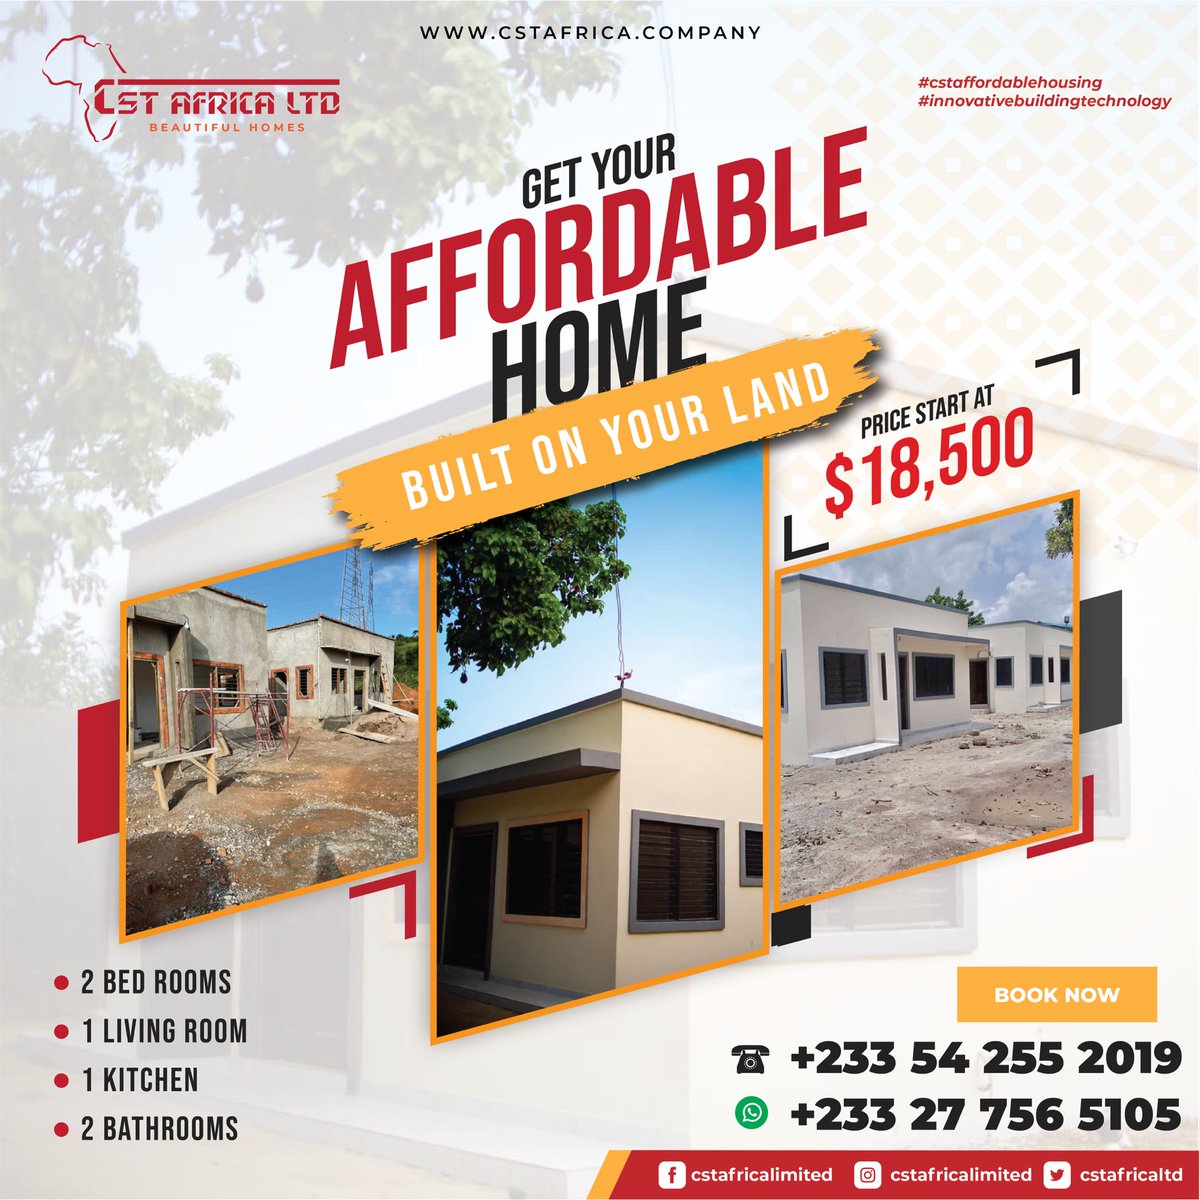 Peace is impossible to put a price upon and in most areas of life, unattainable, but purchasing your own home affords you a grand measure.....
Let's help you find that peace you desire 
#cstafrica #cstaffordabblehomes #innovativebuildingtecnology #ghanahomes #ghanarealestate